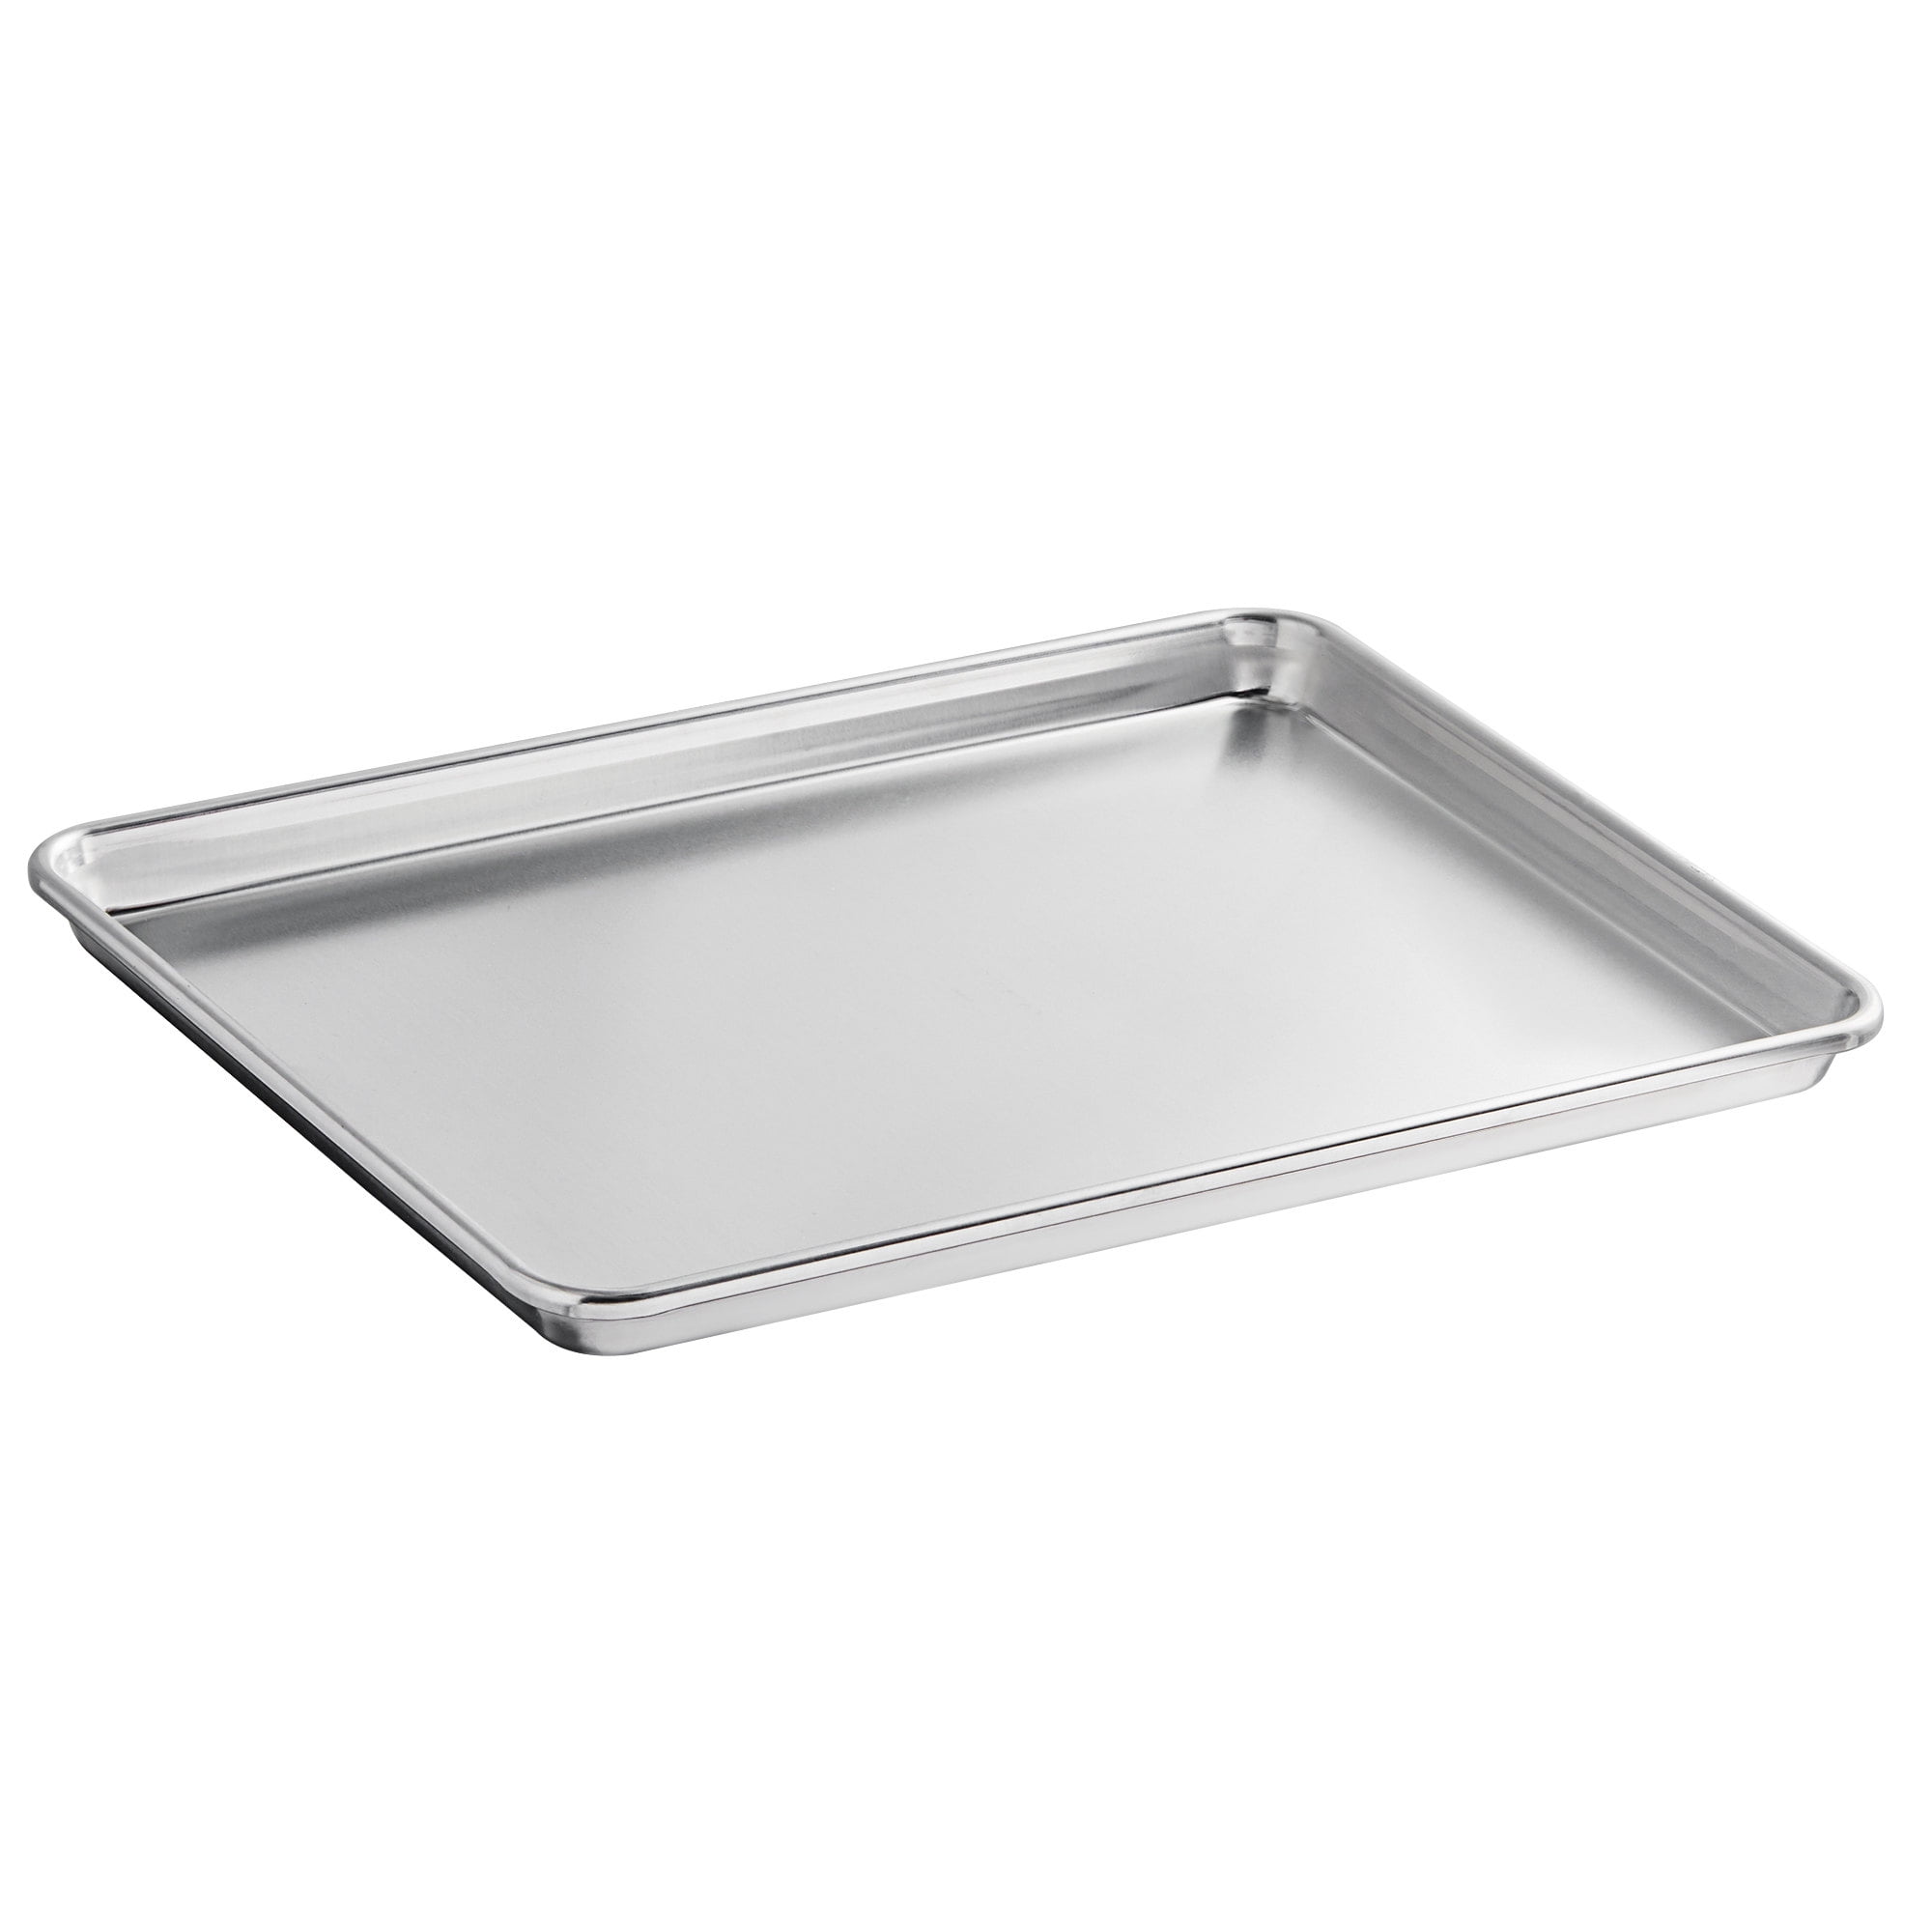 Brand New! 14”x17” SET OF TWO Calphalon Classic Nonstick Baking Cookie Sheet 